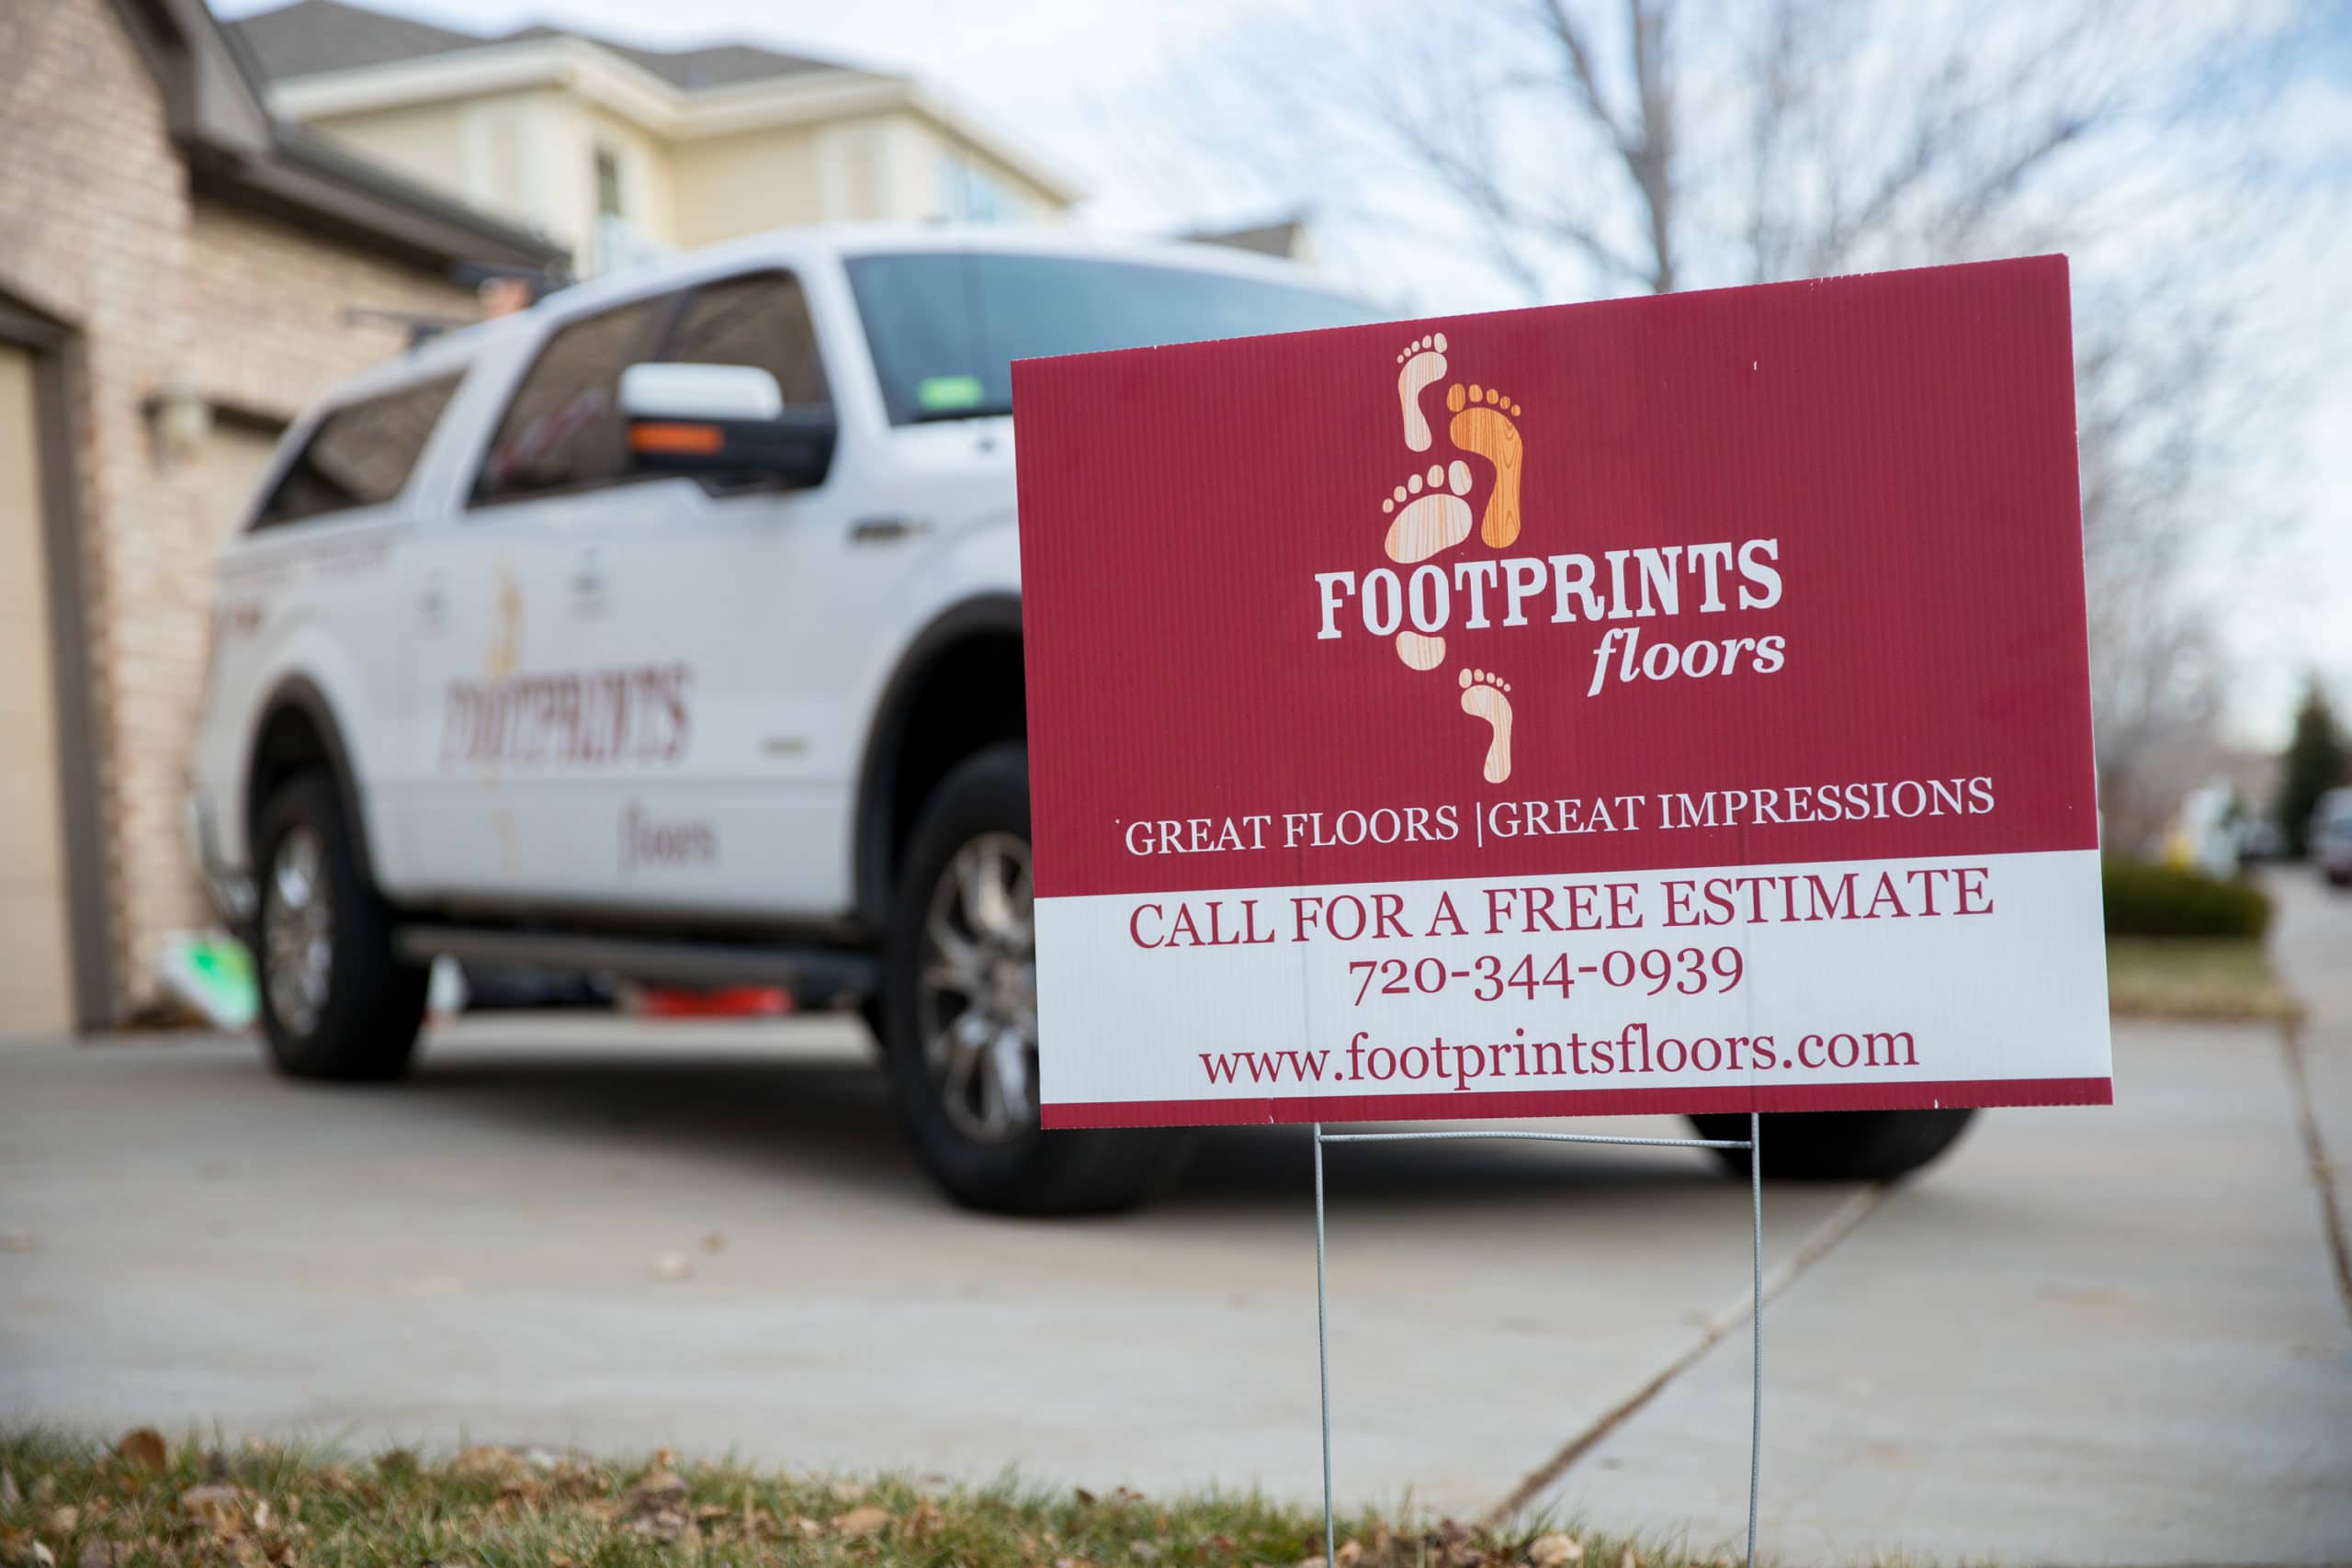 Footprints Floors home improvement franchise sign in front yard showing the economic stability.